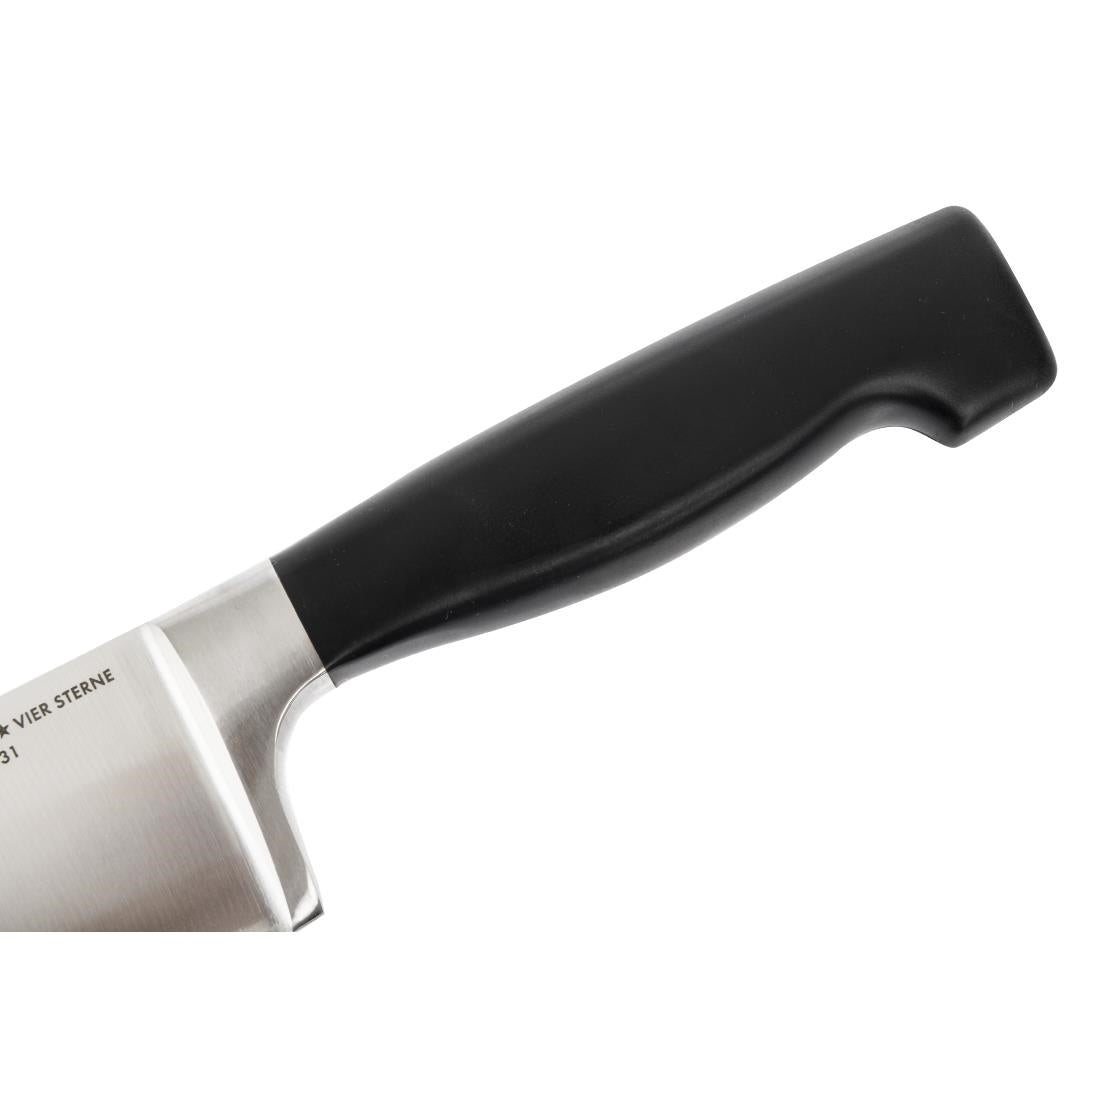 FA930 Zwilling Four Star Chefs Knife 20cm JD Catering Equipment Solutions Ltd